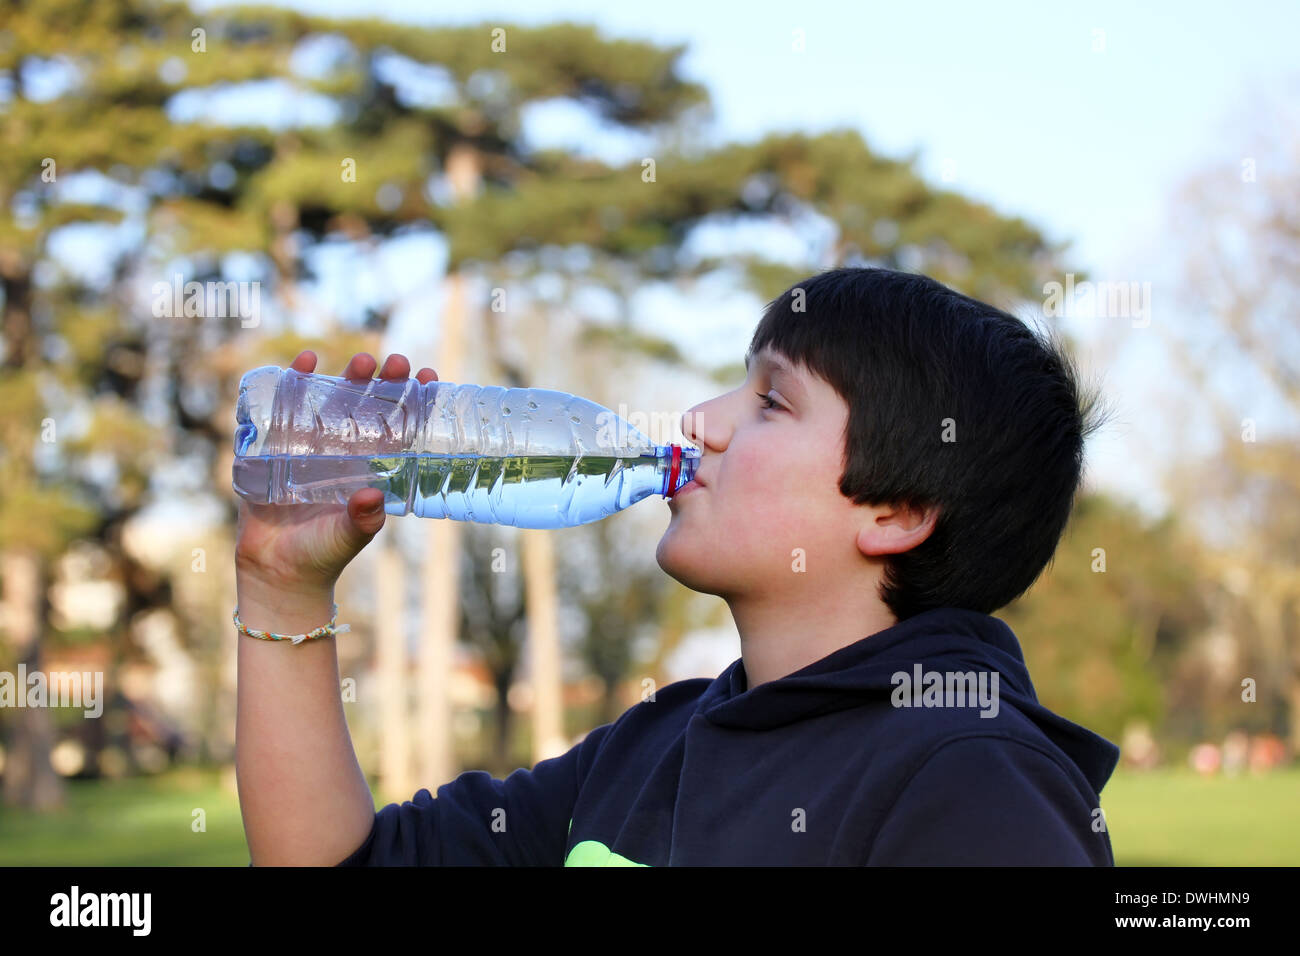 A boy thirsty eagerly drinking water from plastic bottle Stock Photo